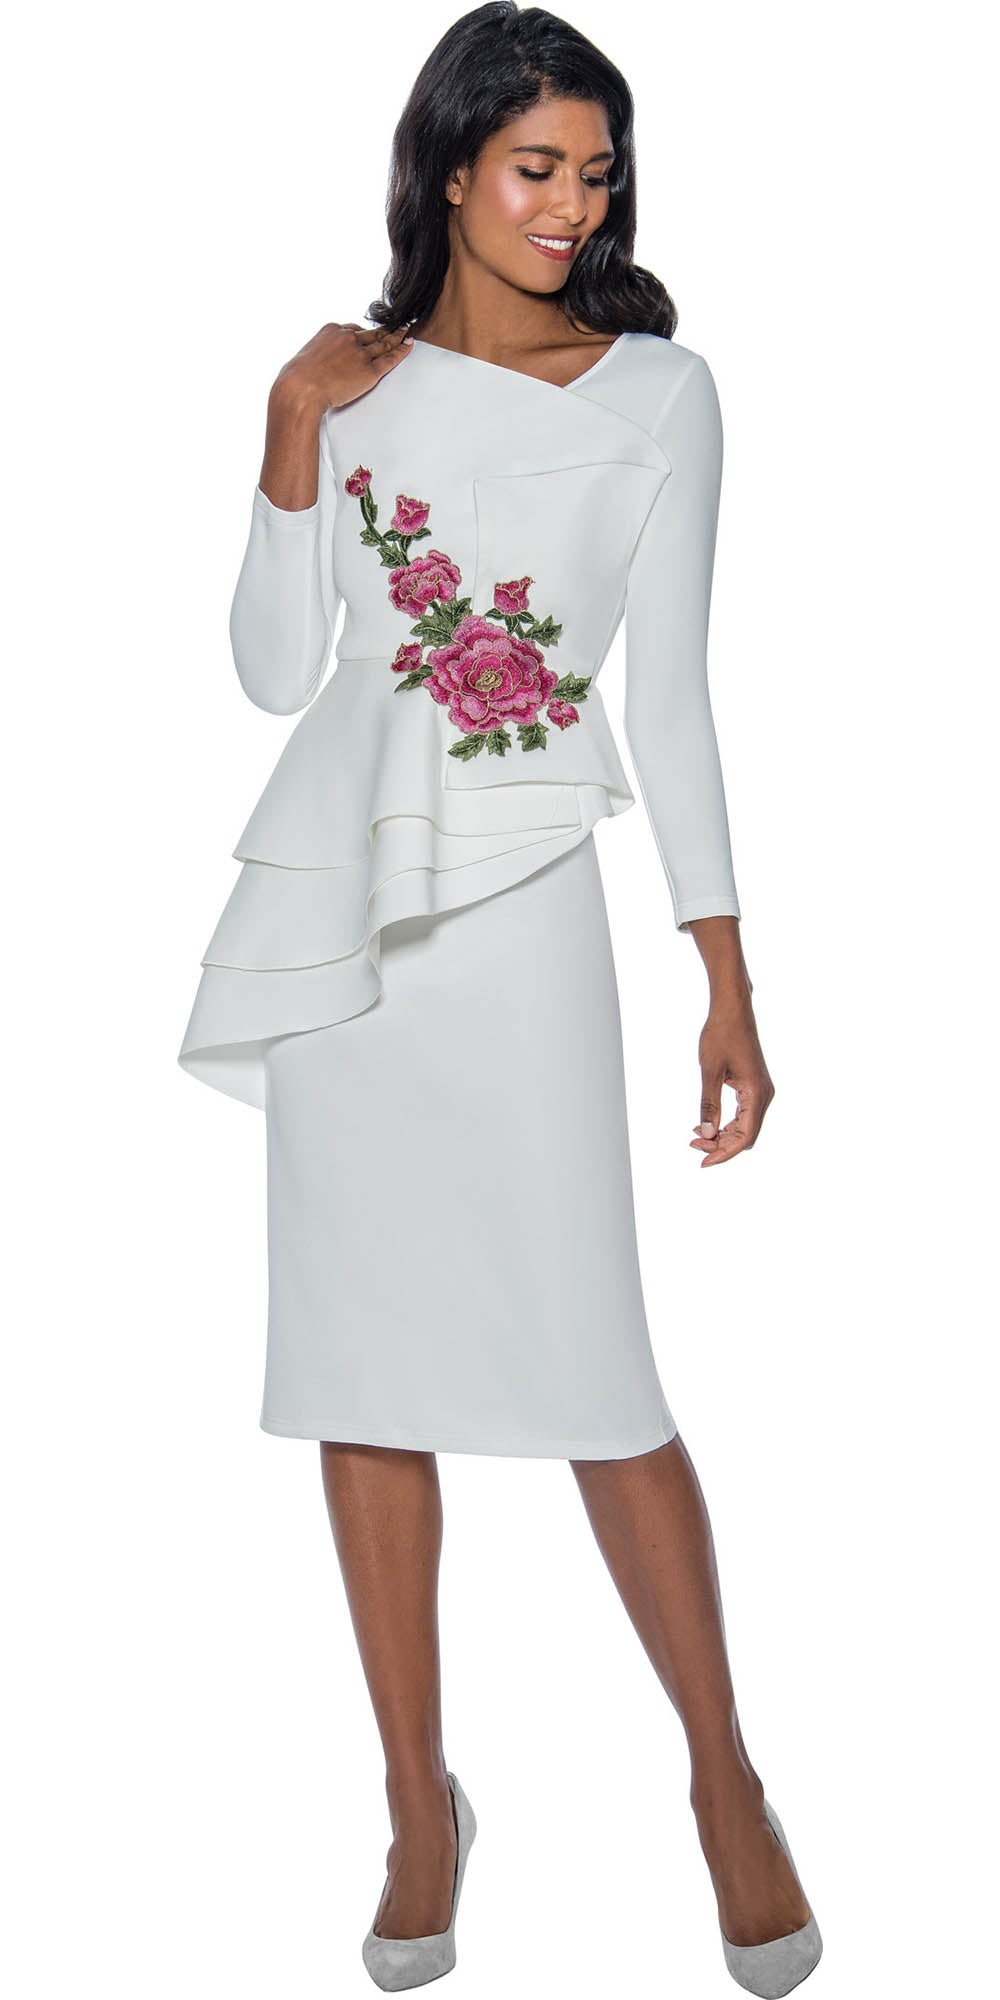 Nubiano Dresses DN771 - Asymmetric Layered Peplum Dress with Floral Detailing